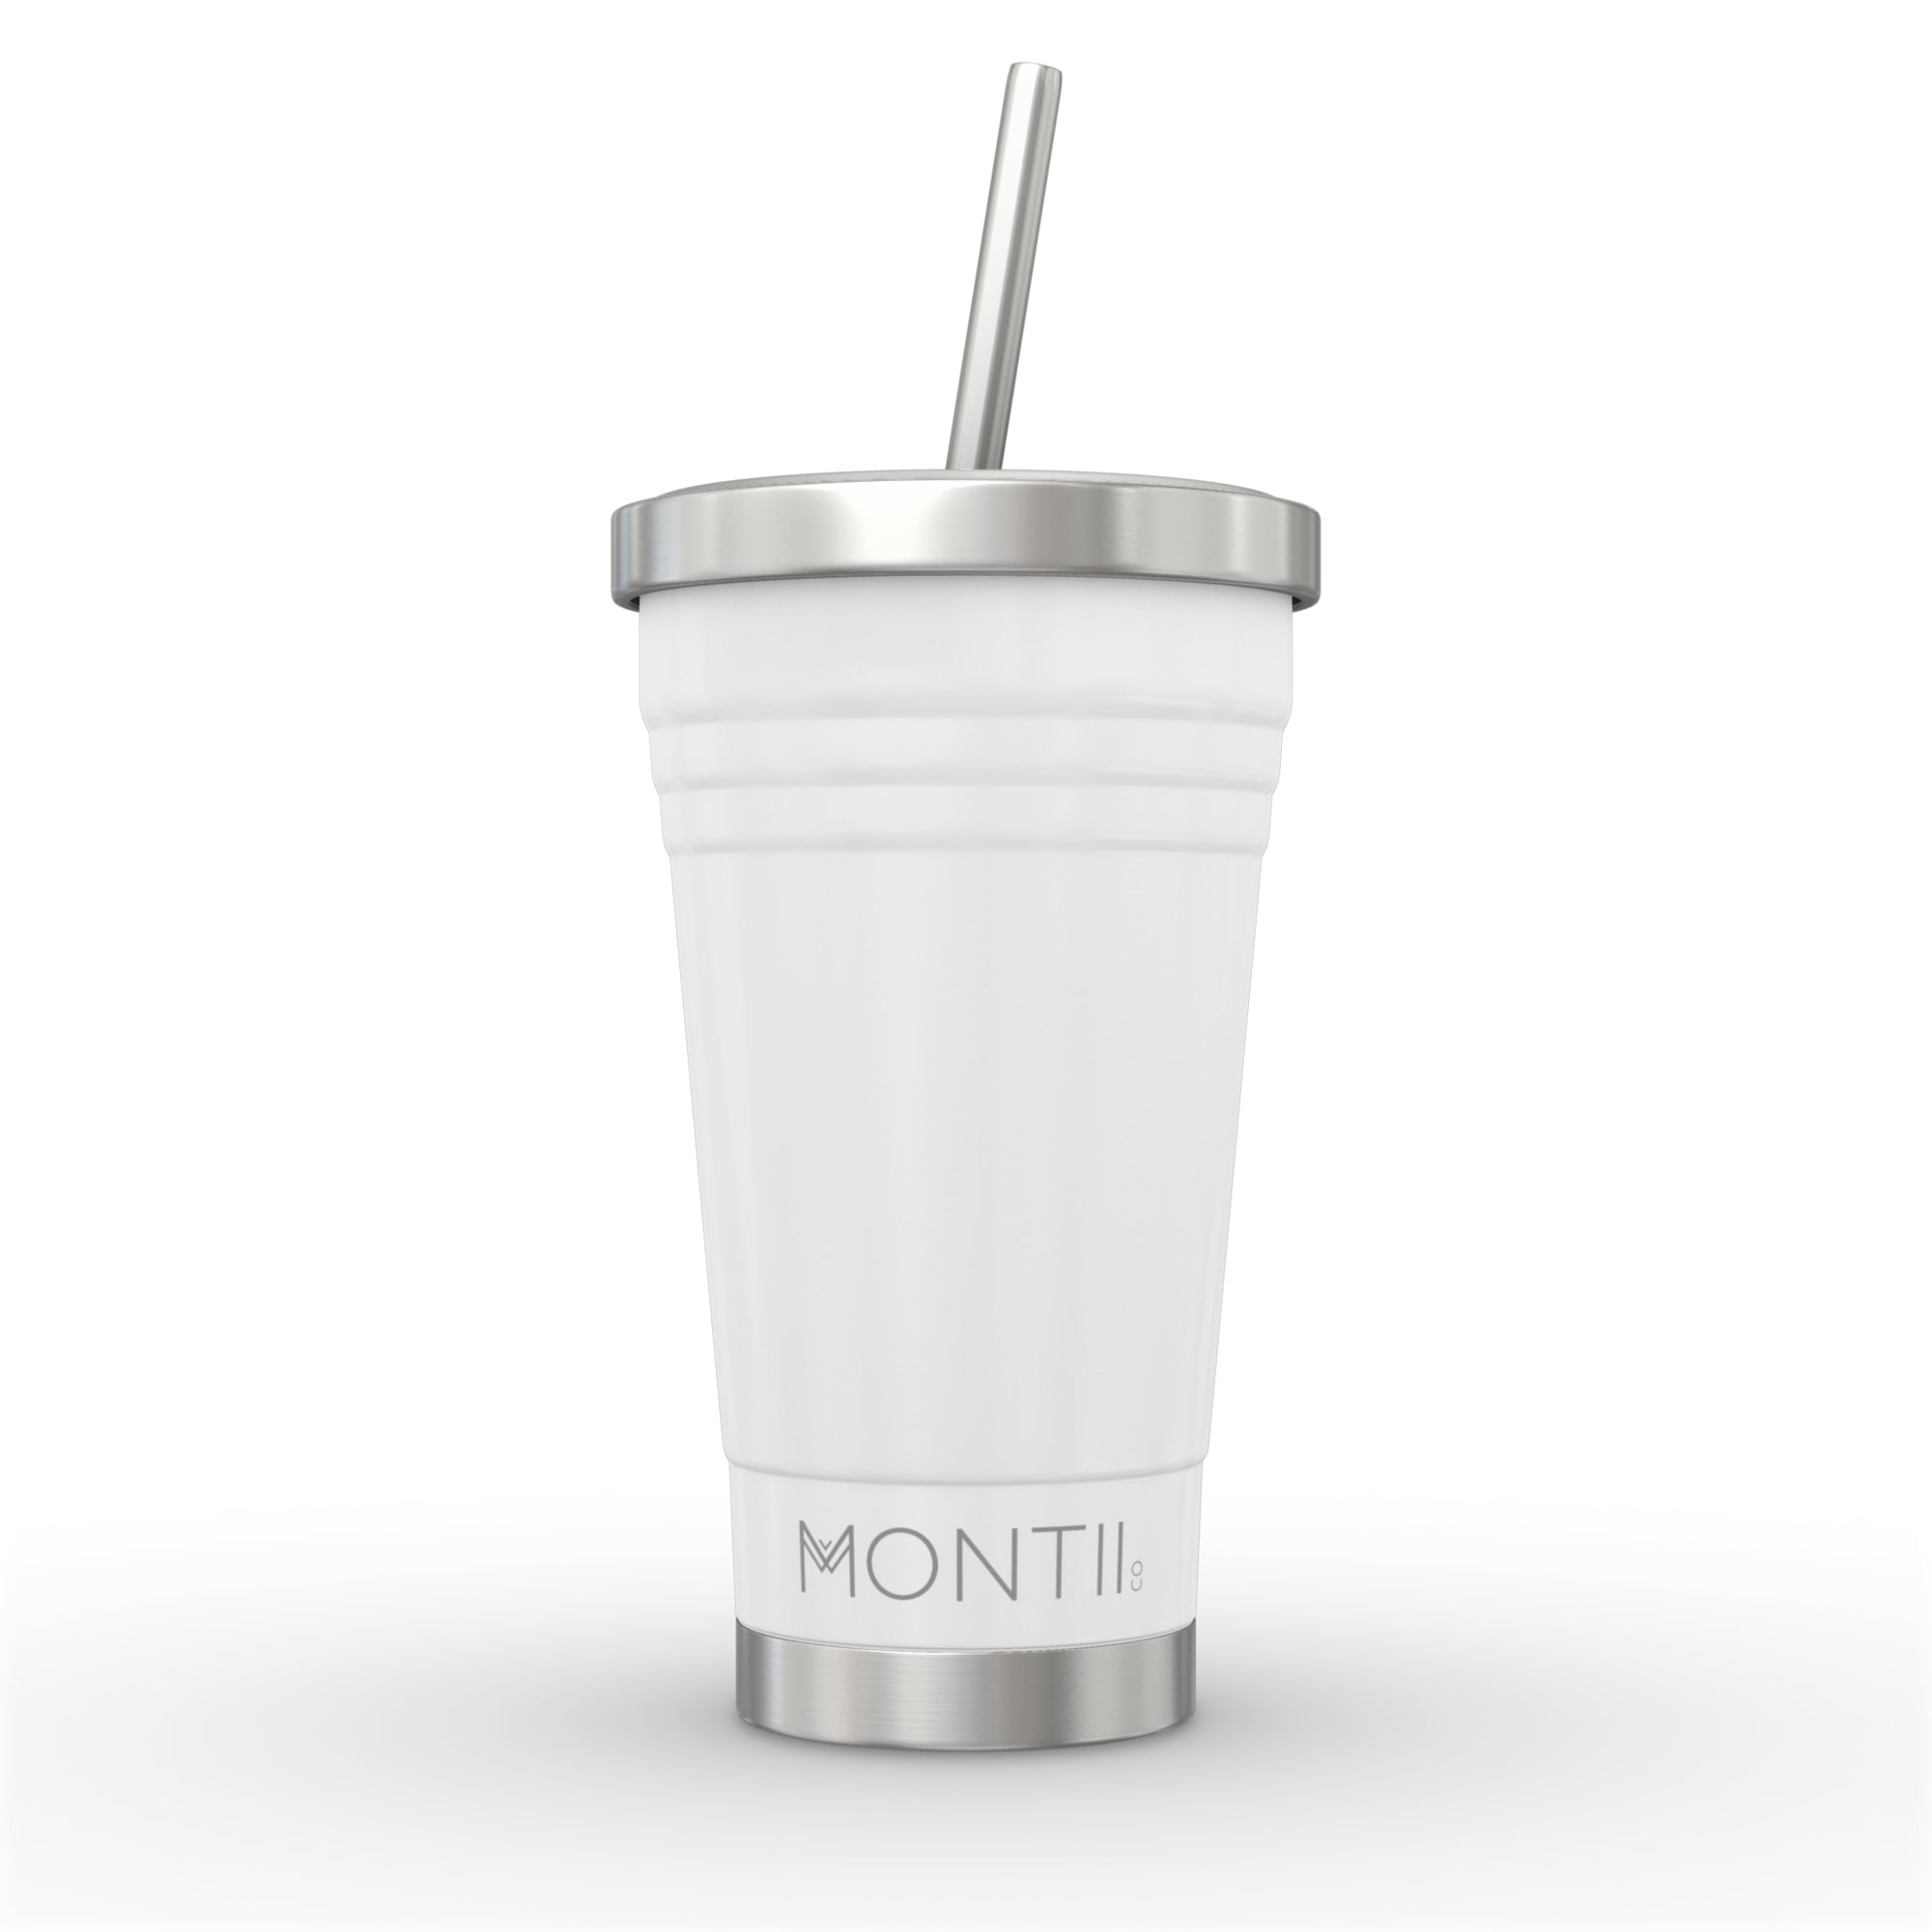 Reusable Kids Smoothie Cups